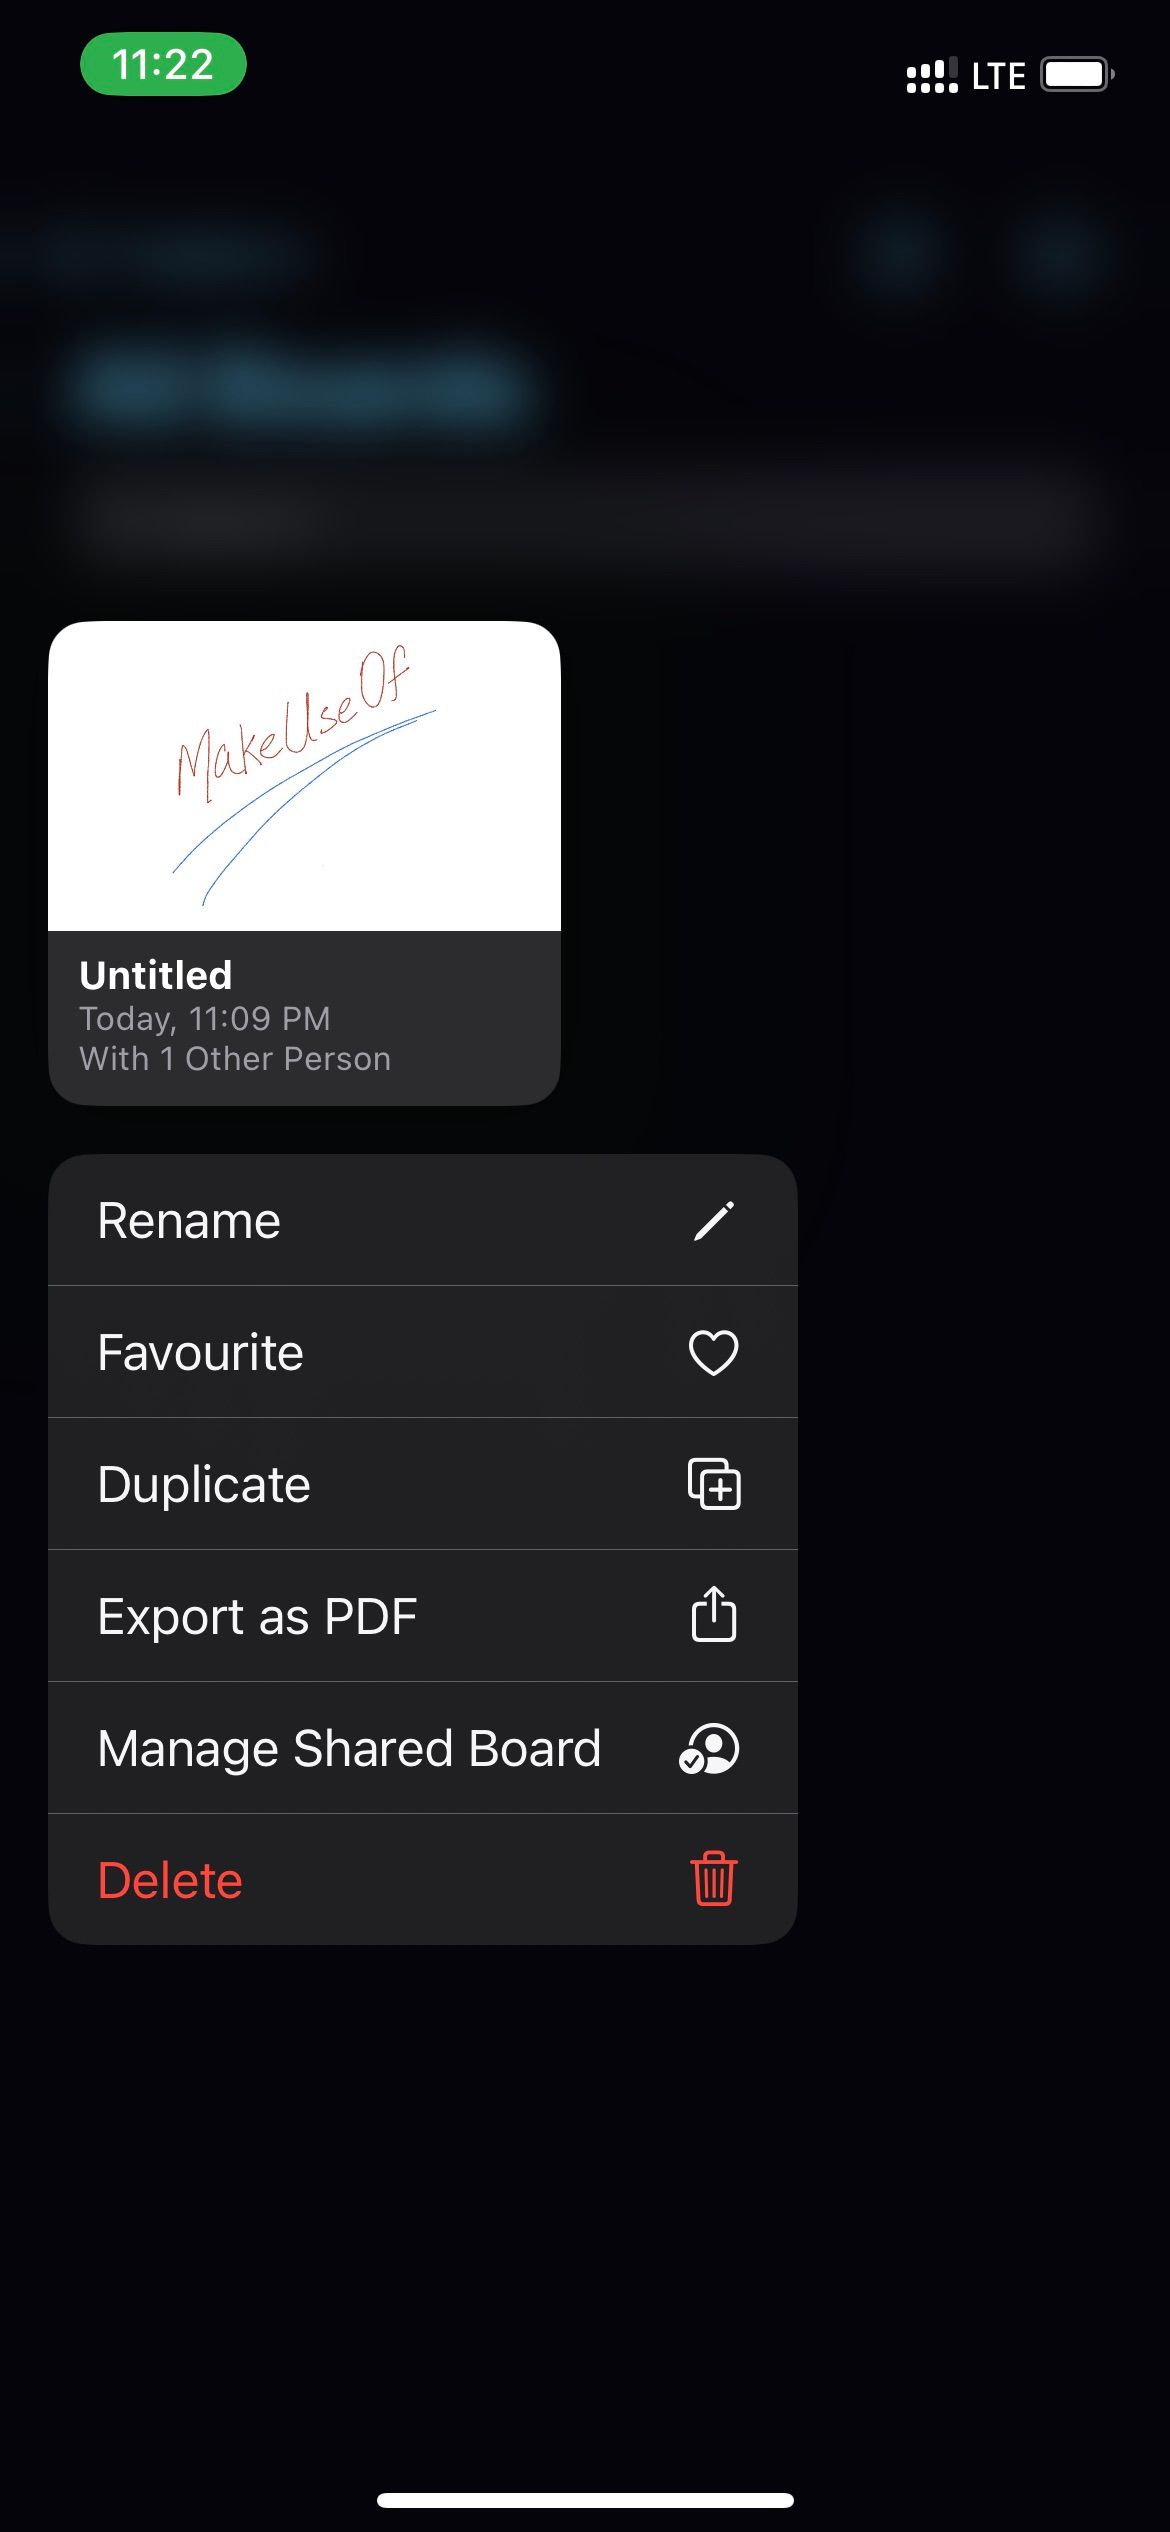 Tap and hold the board for rename option along with favorite, duplicate, export to PDF, and Delete options.